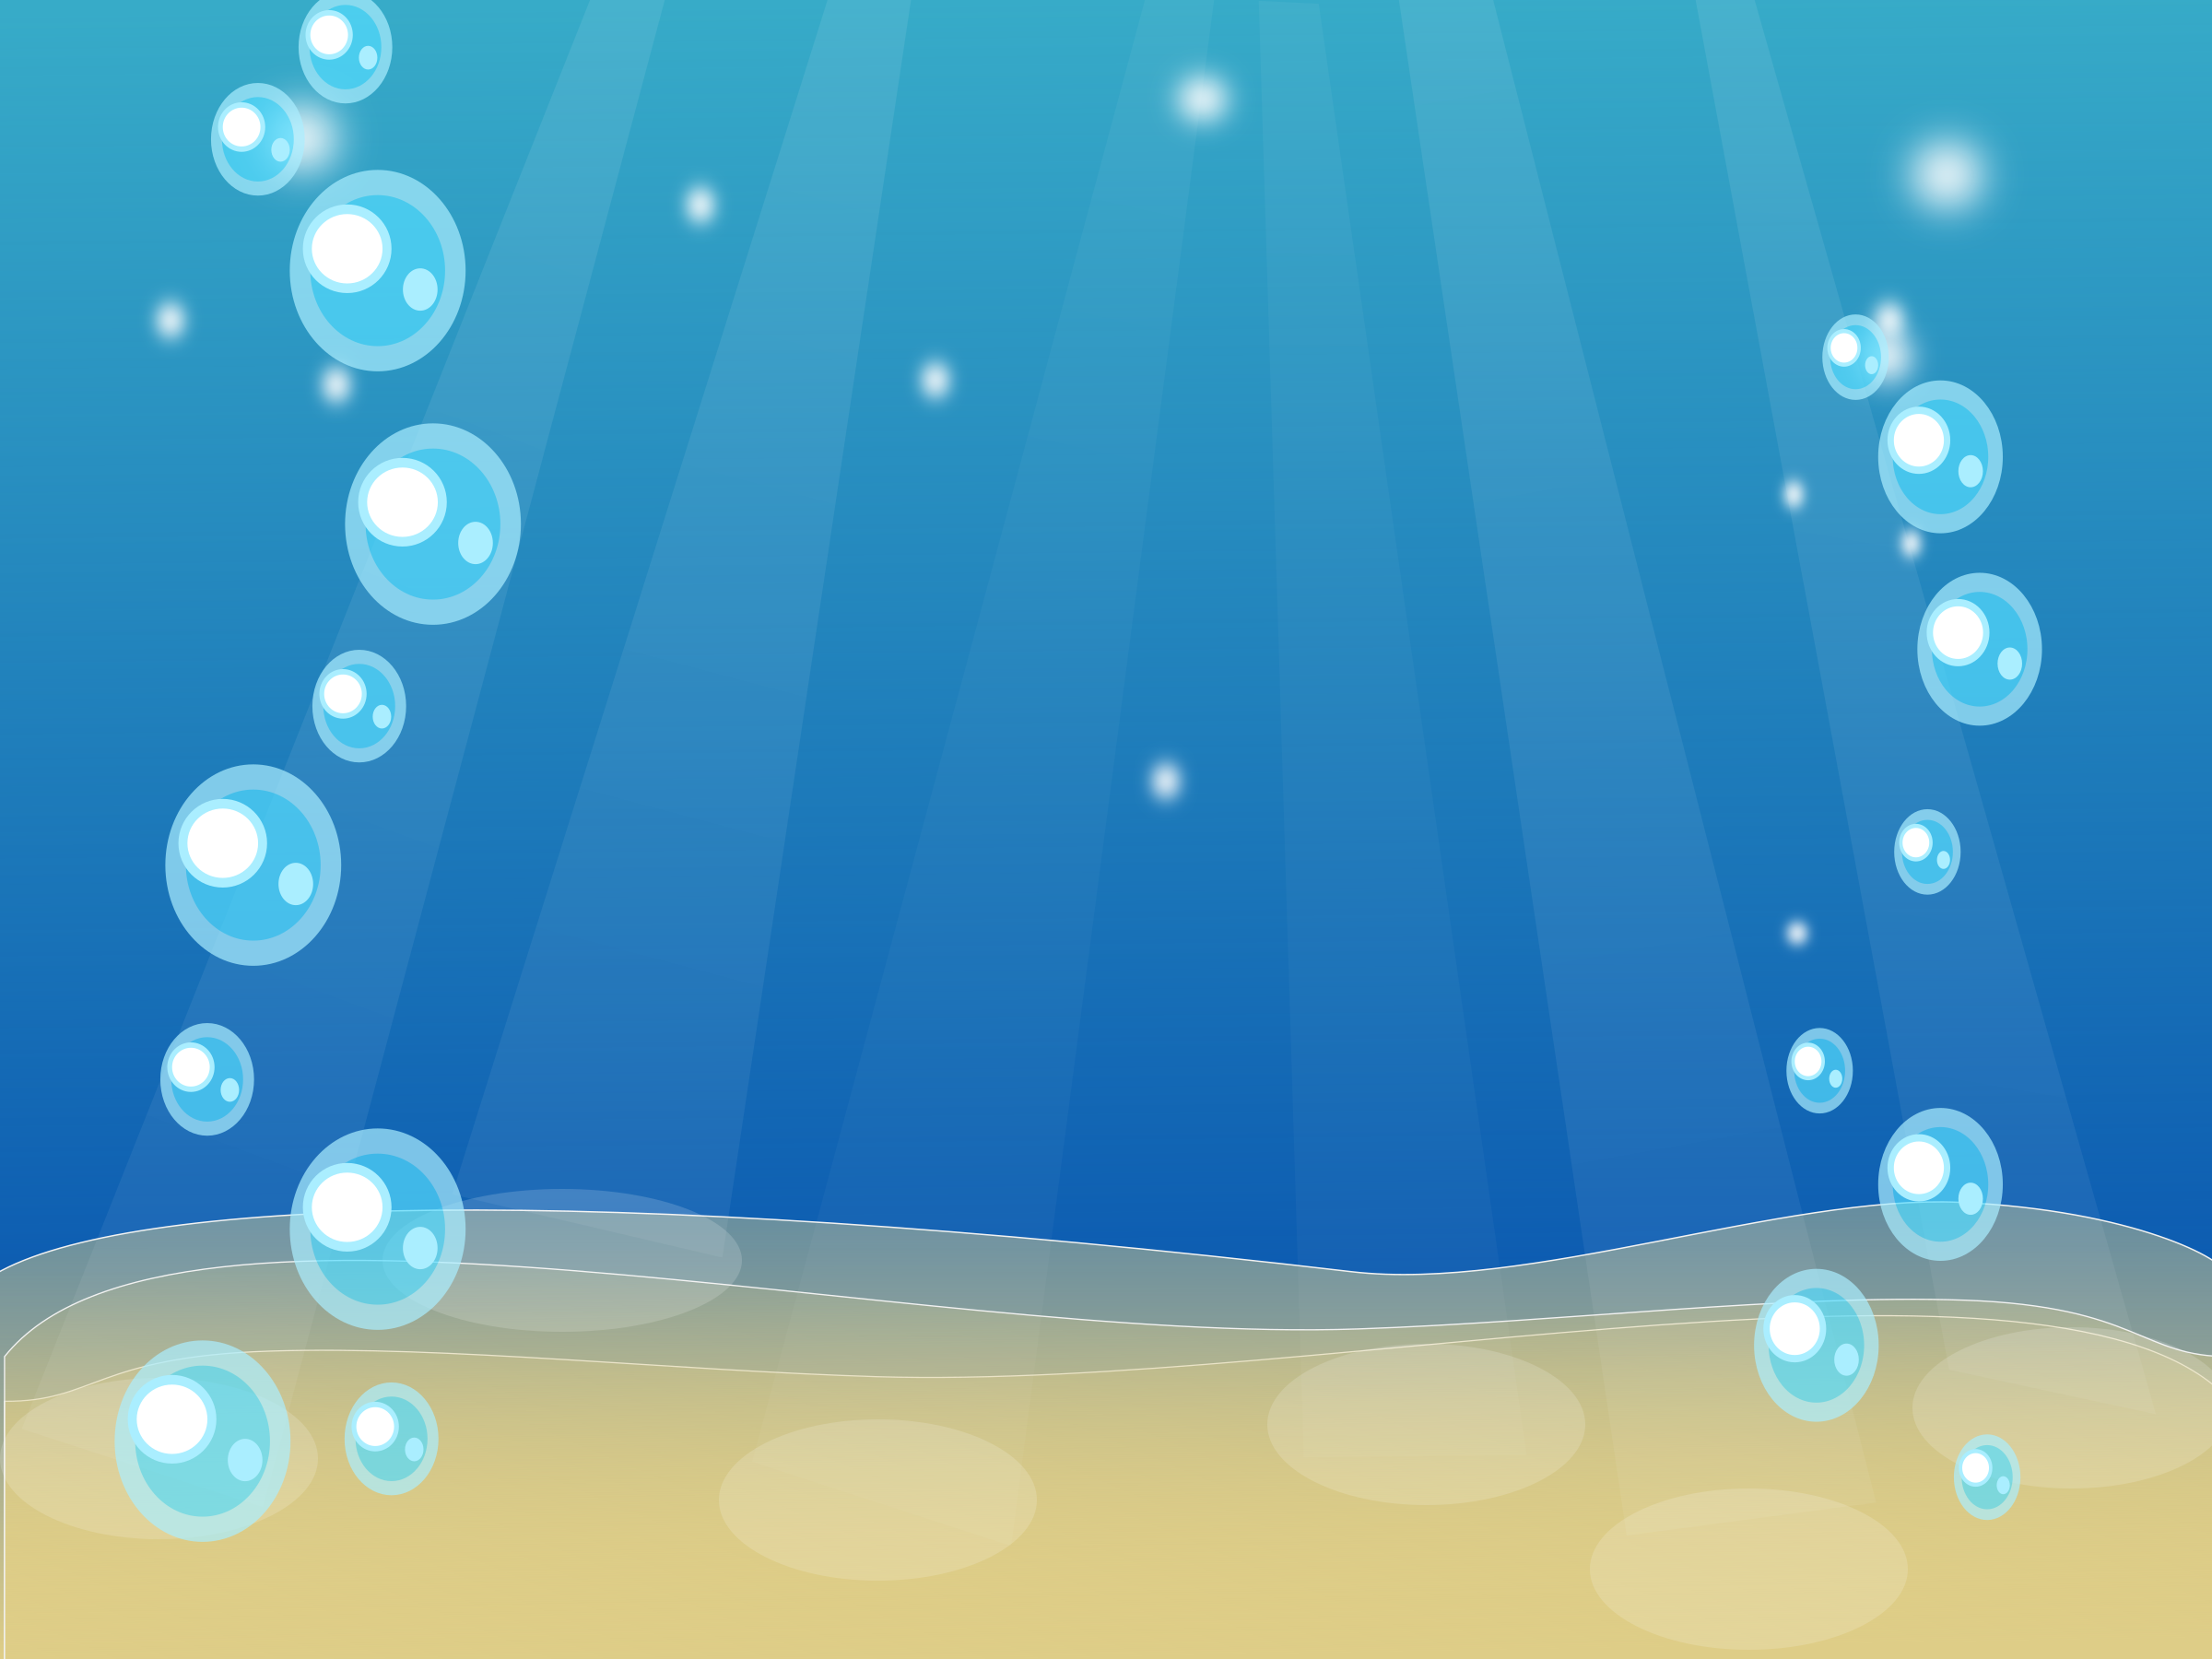 Download Bubbles in the water vector clipart image - Free stock photo - Public Domain photo - CC0 Images